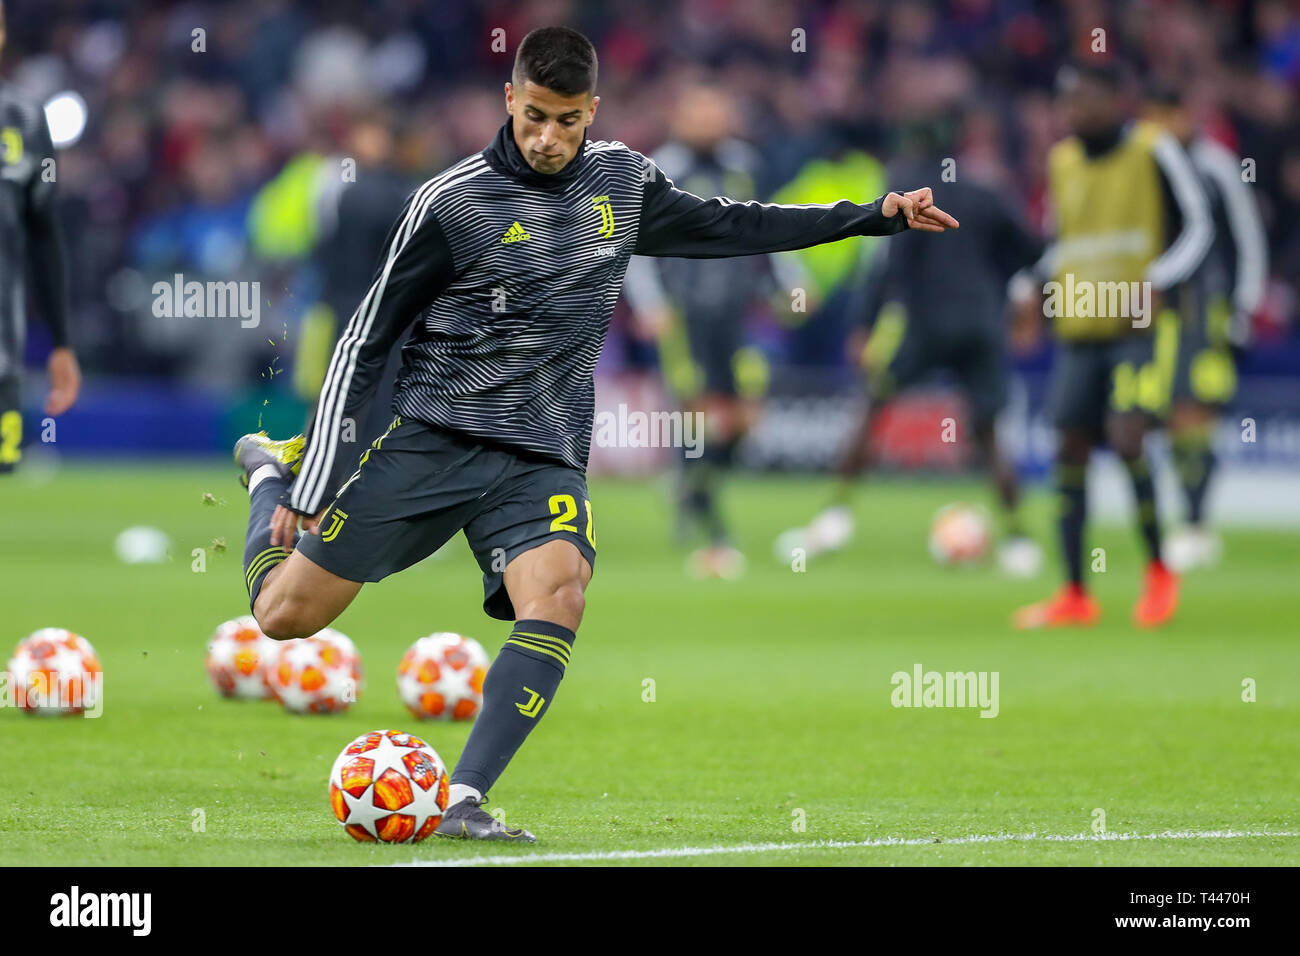 10th of april 2019 Amsterdam, The Netherlands Soccer Champions League Ajax v Juventus   Joao Cancelo of Juventus Stock Photo